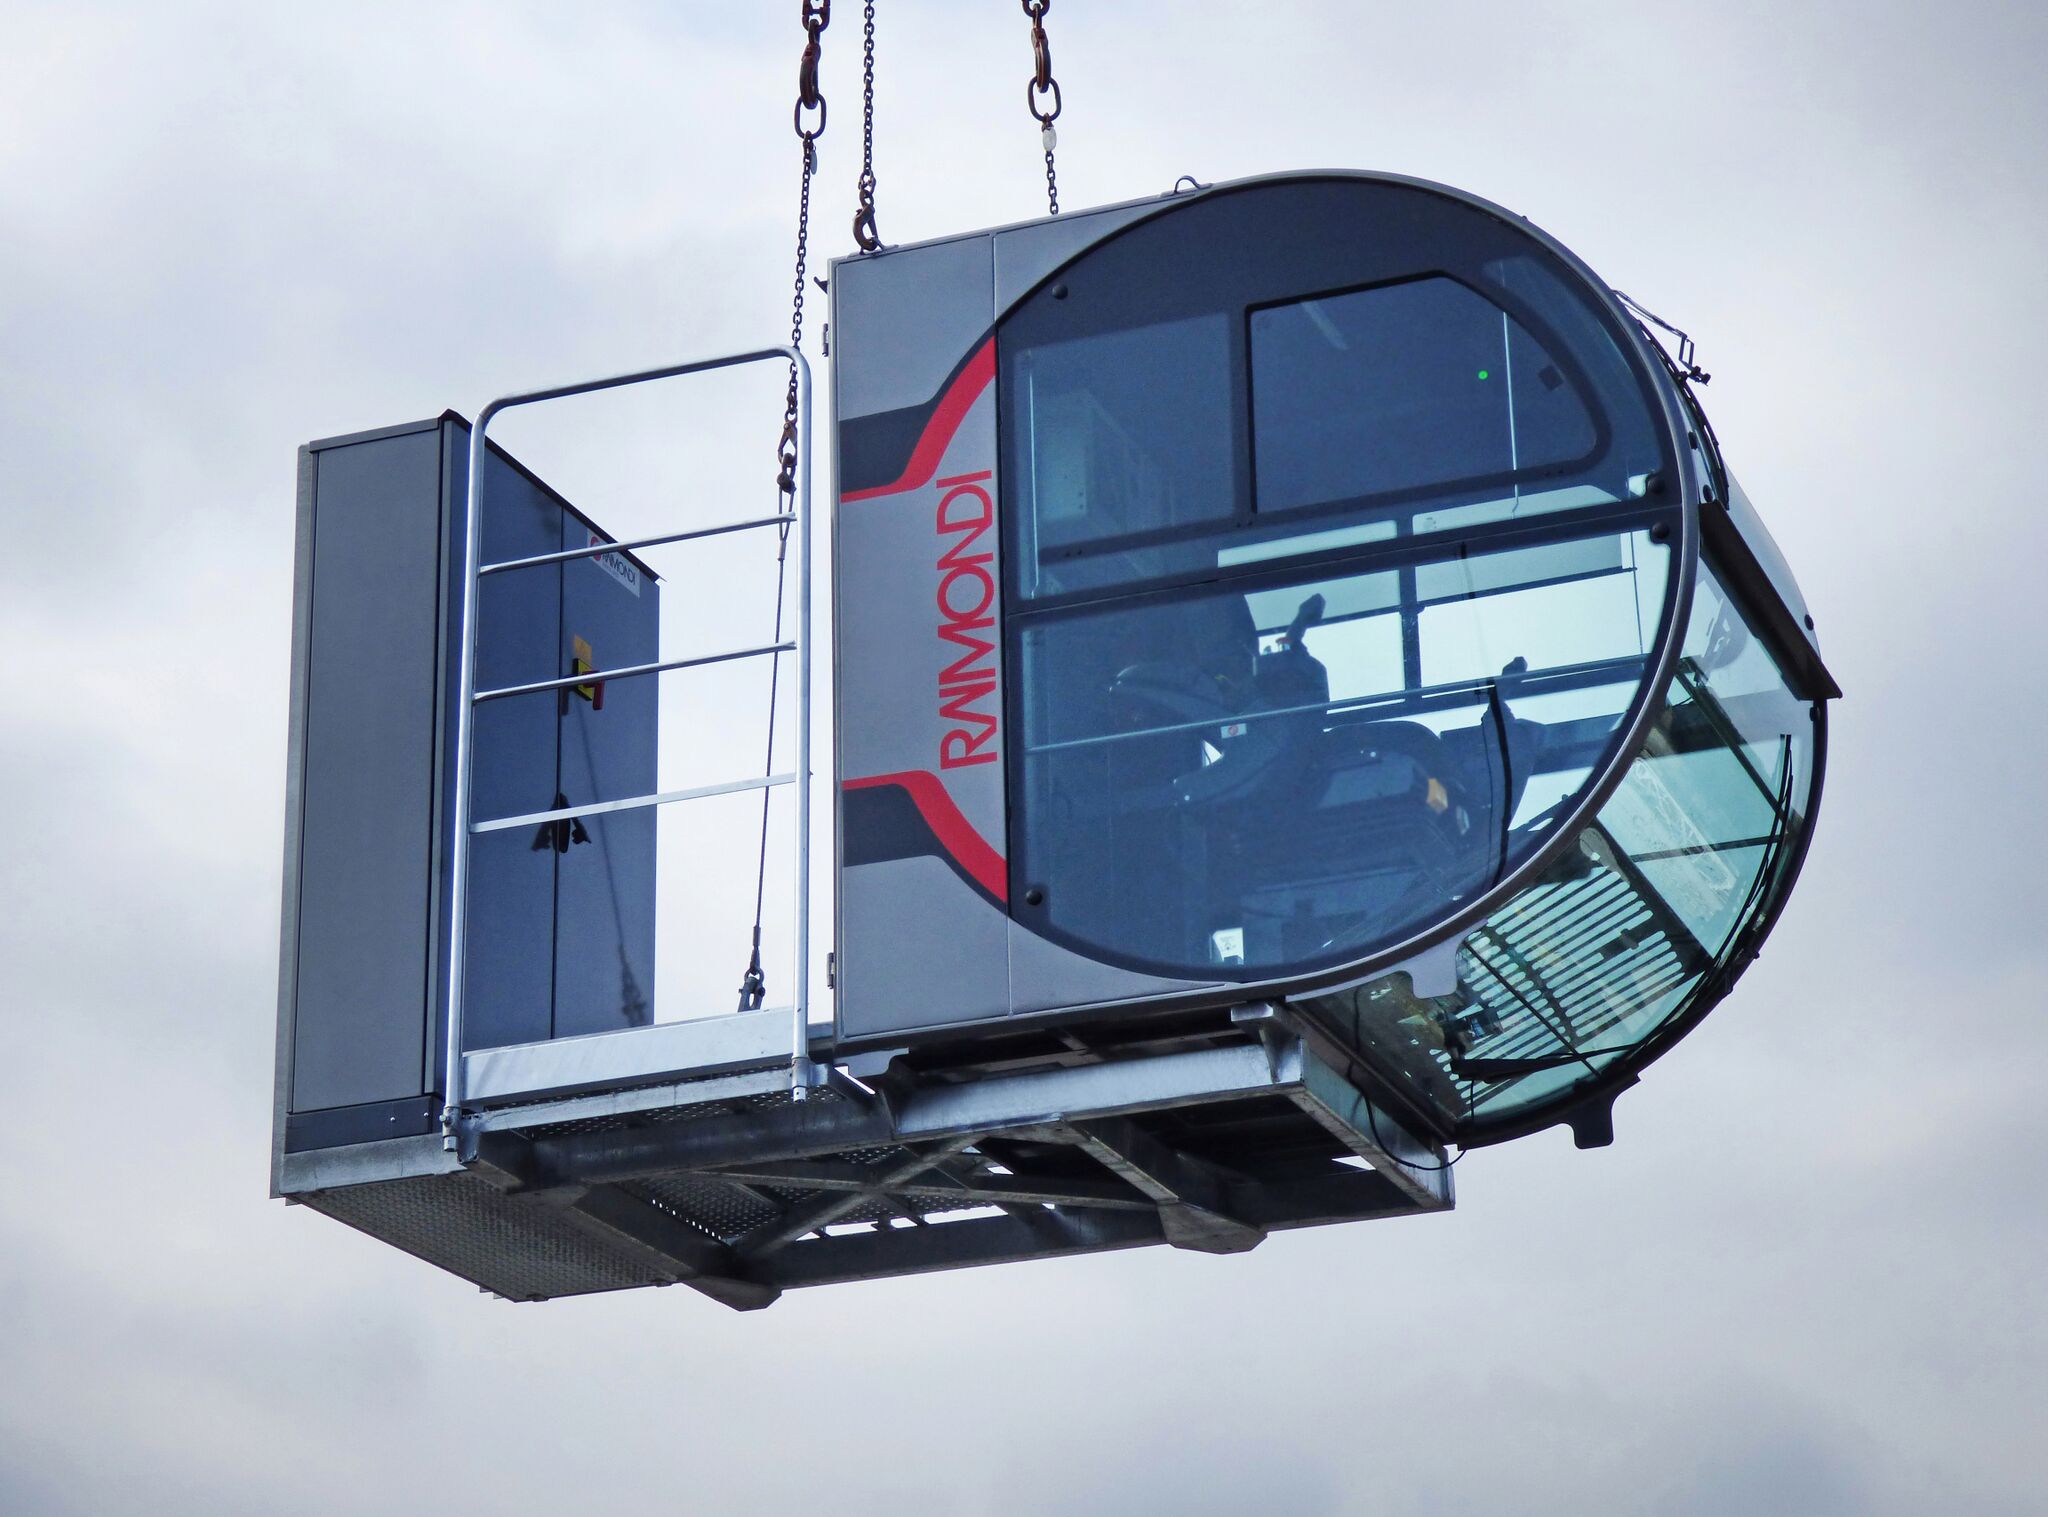 At the Deluxe R16 crane cabin more than 80 percent of the total cabin surface is glass.